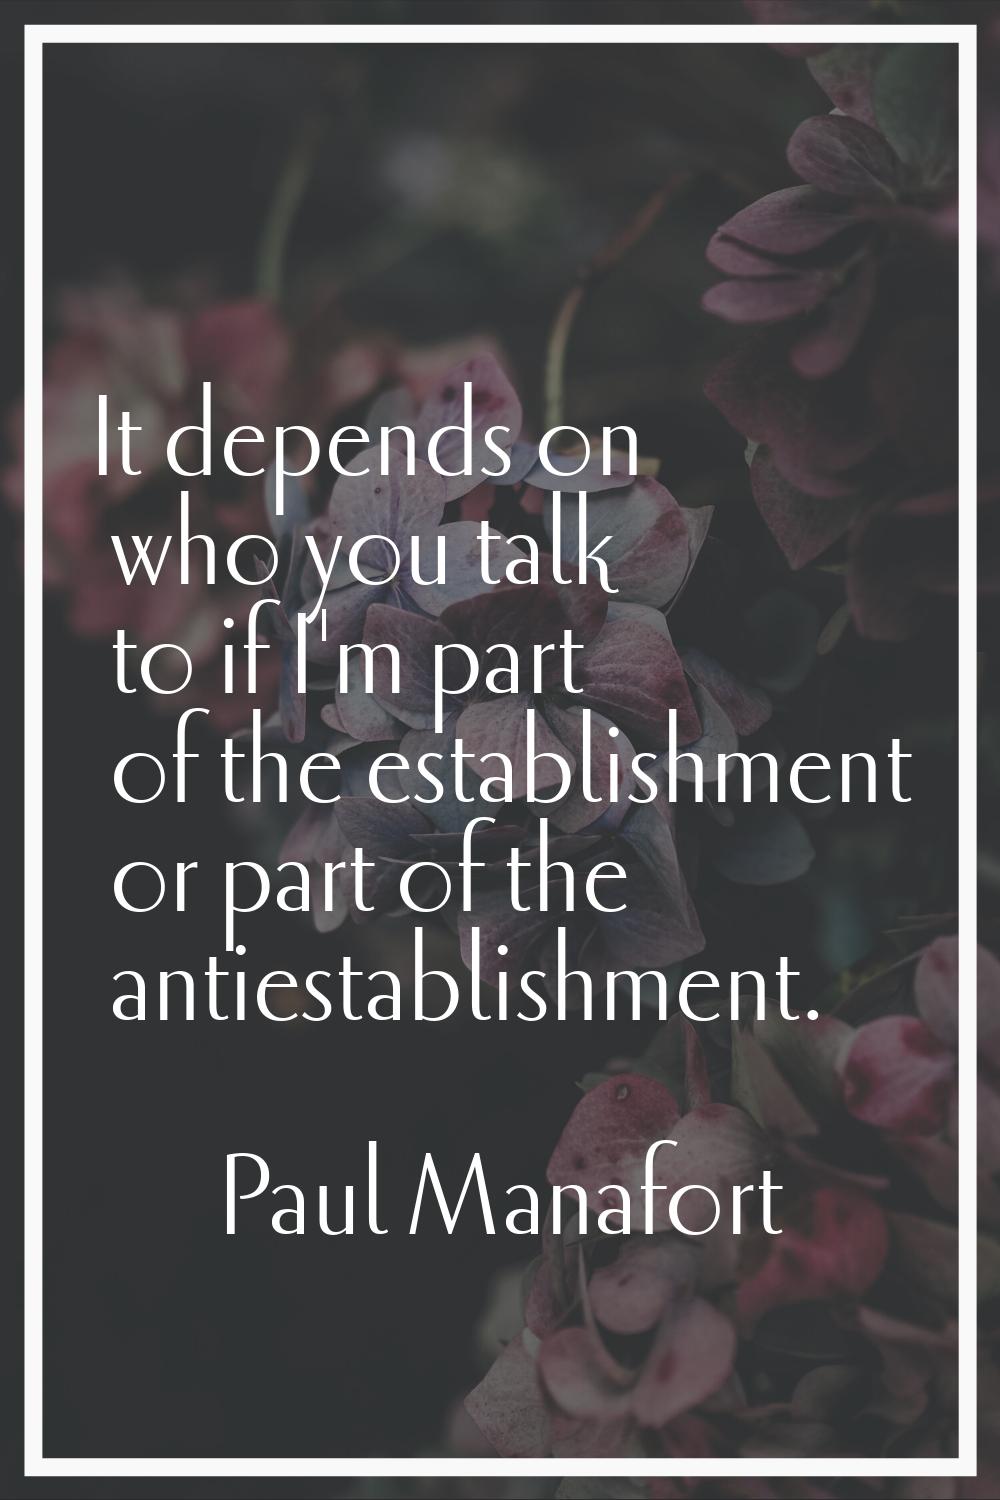 It depends on who you talk to if I'm part of the establishment or part of the antiestablishment.